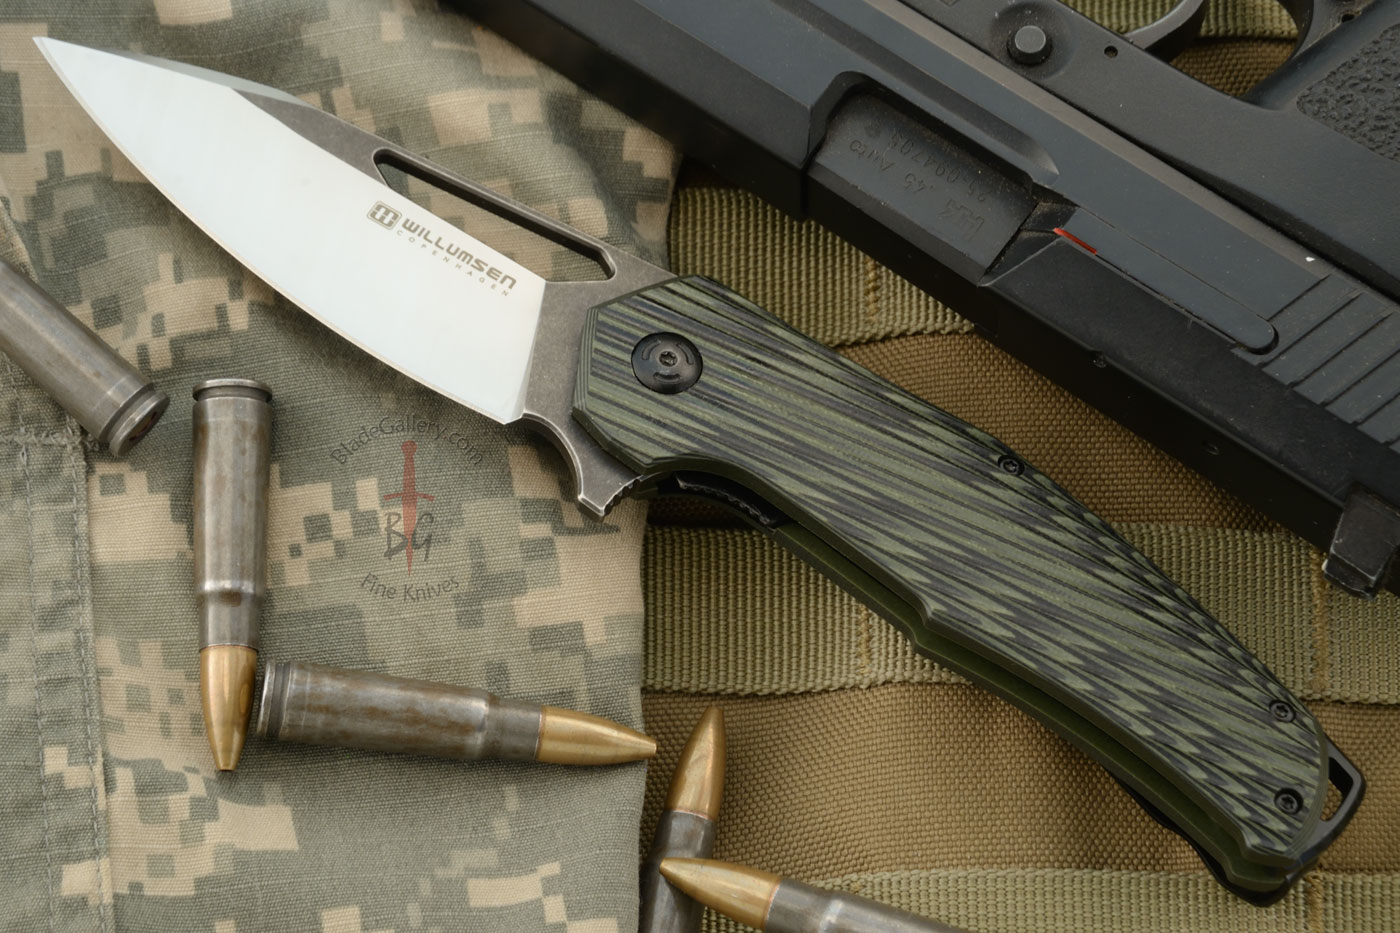 Chibs Flipper with Black/Green G-10